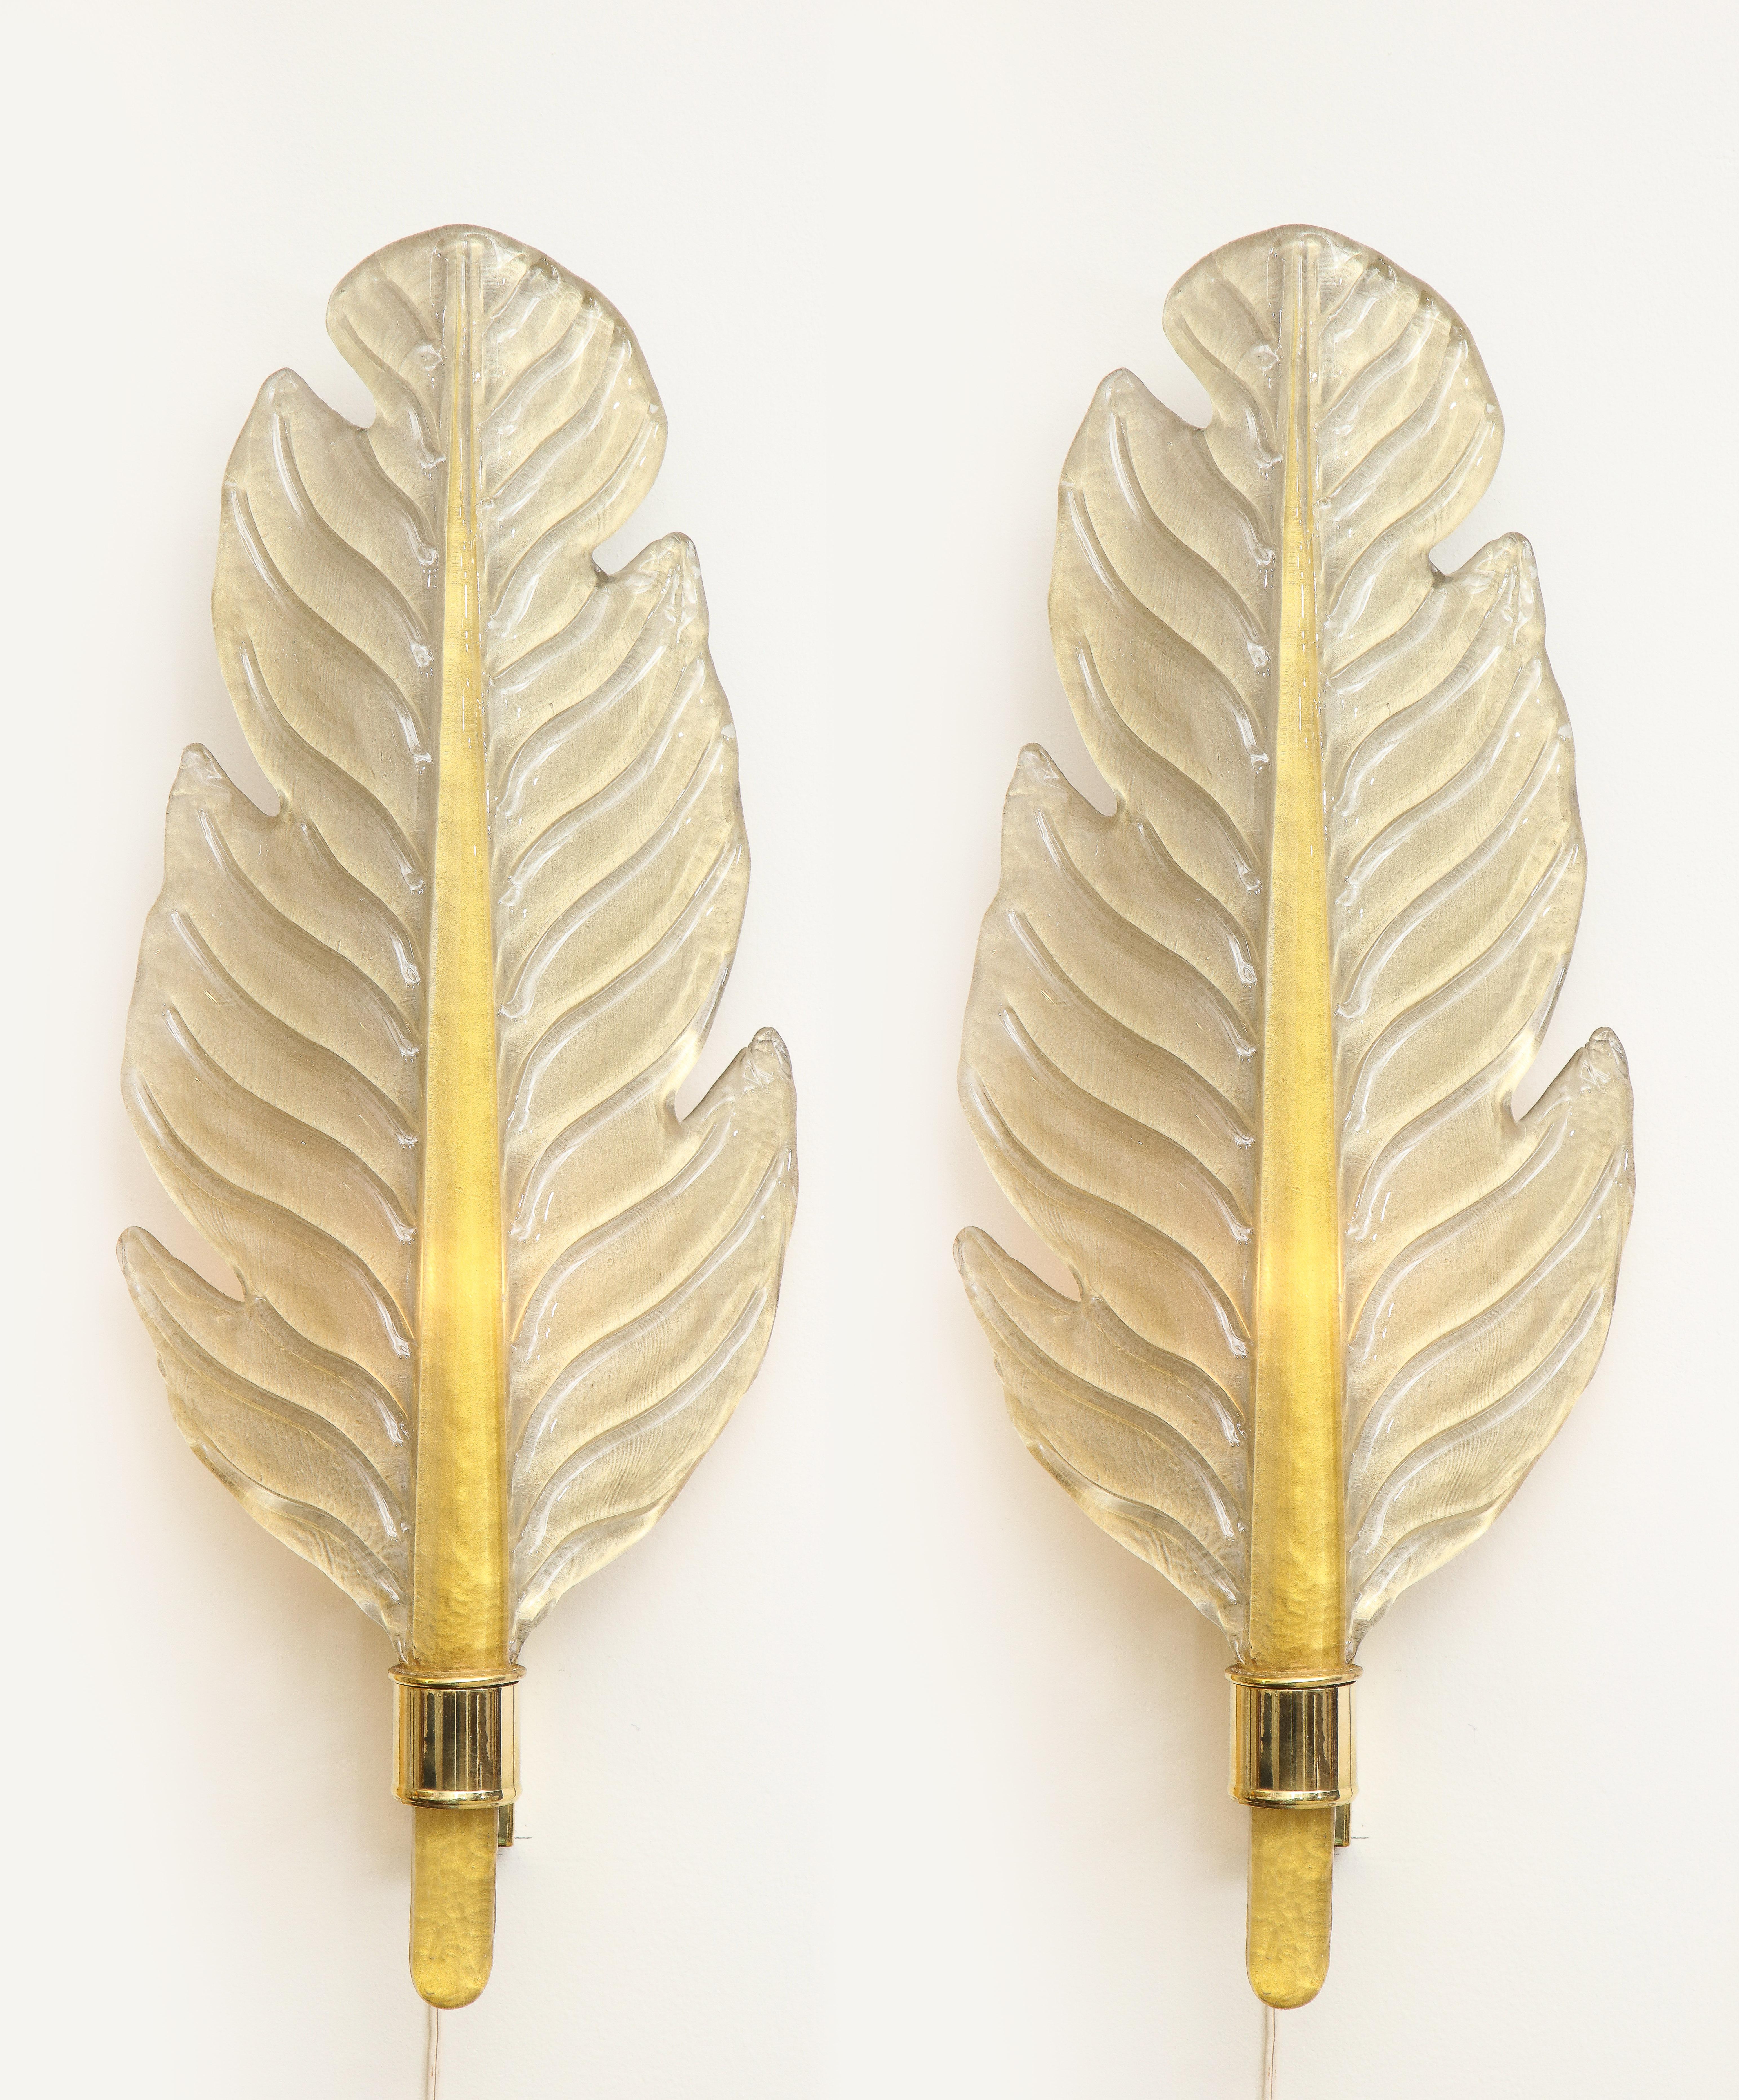 Pair of handcasted clear Murano glass sconces infused with 24-karat gold to give the glass a metallic, shimmering effect. The solft shimmering gold leaf is accentuated by the deeper gold center stem. This pair of leaf-shaped sconces were